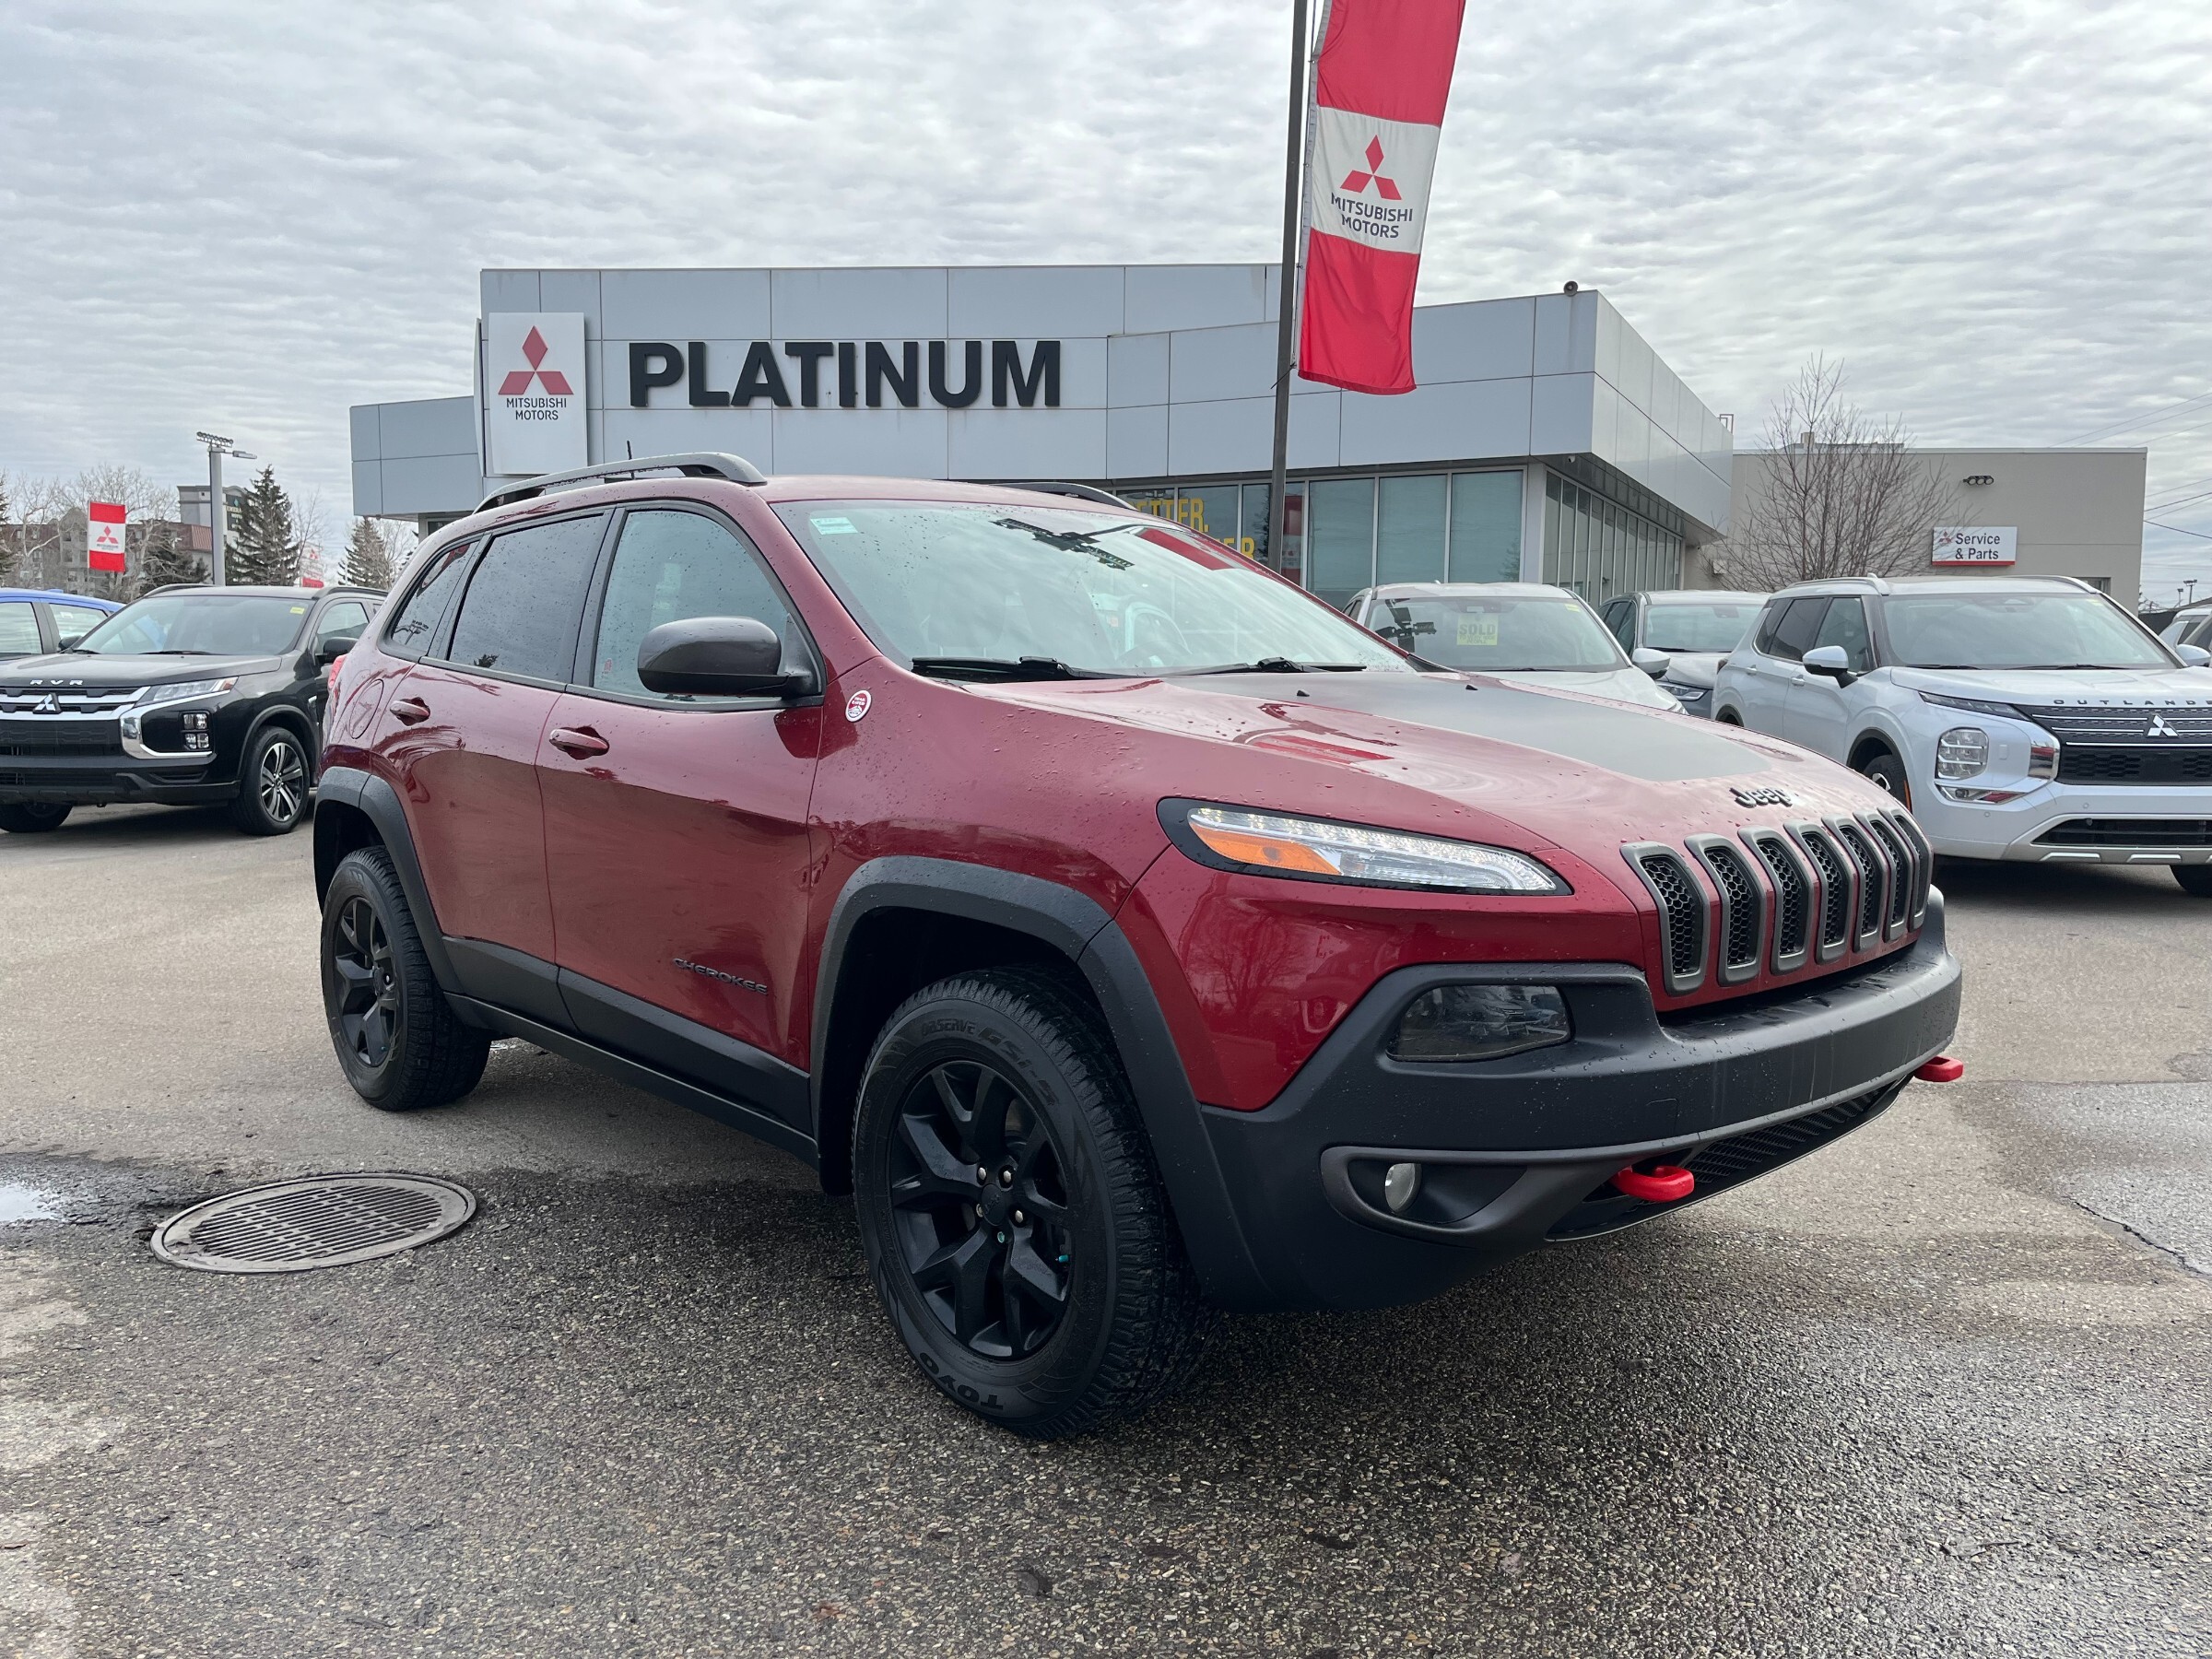 2017 Jeep Cherokee Trailhawk | 3.2L V6 | One Owner - Accident Free